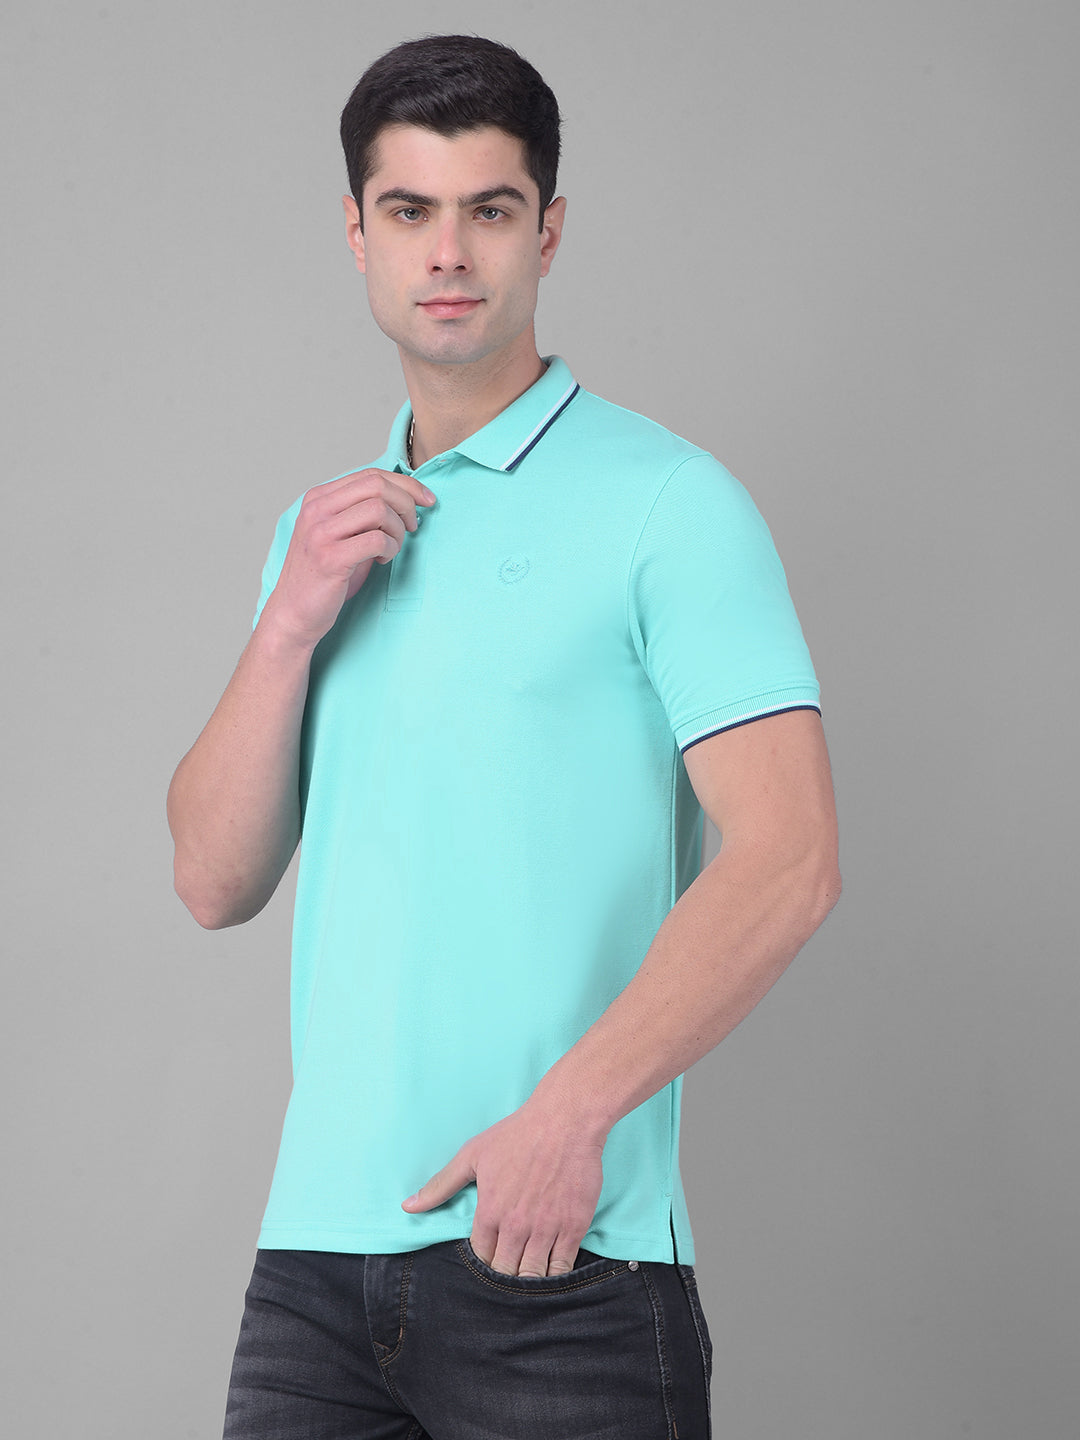 COBB SOLID TURQUOISE BLUE POLO NECK T-SHIRT